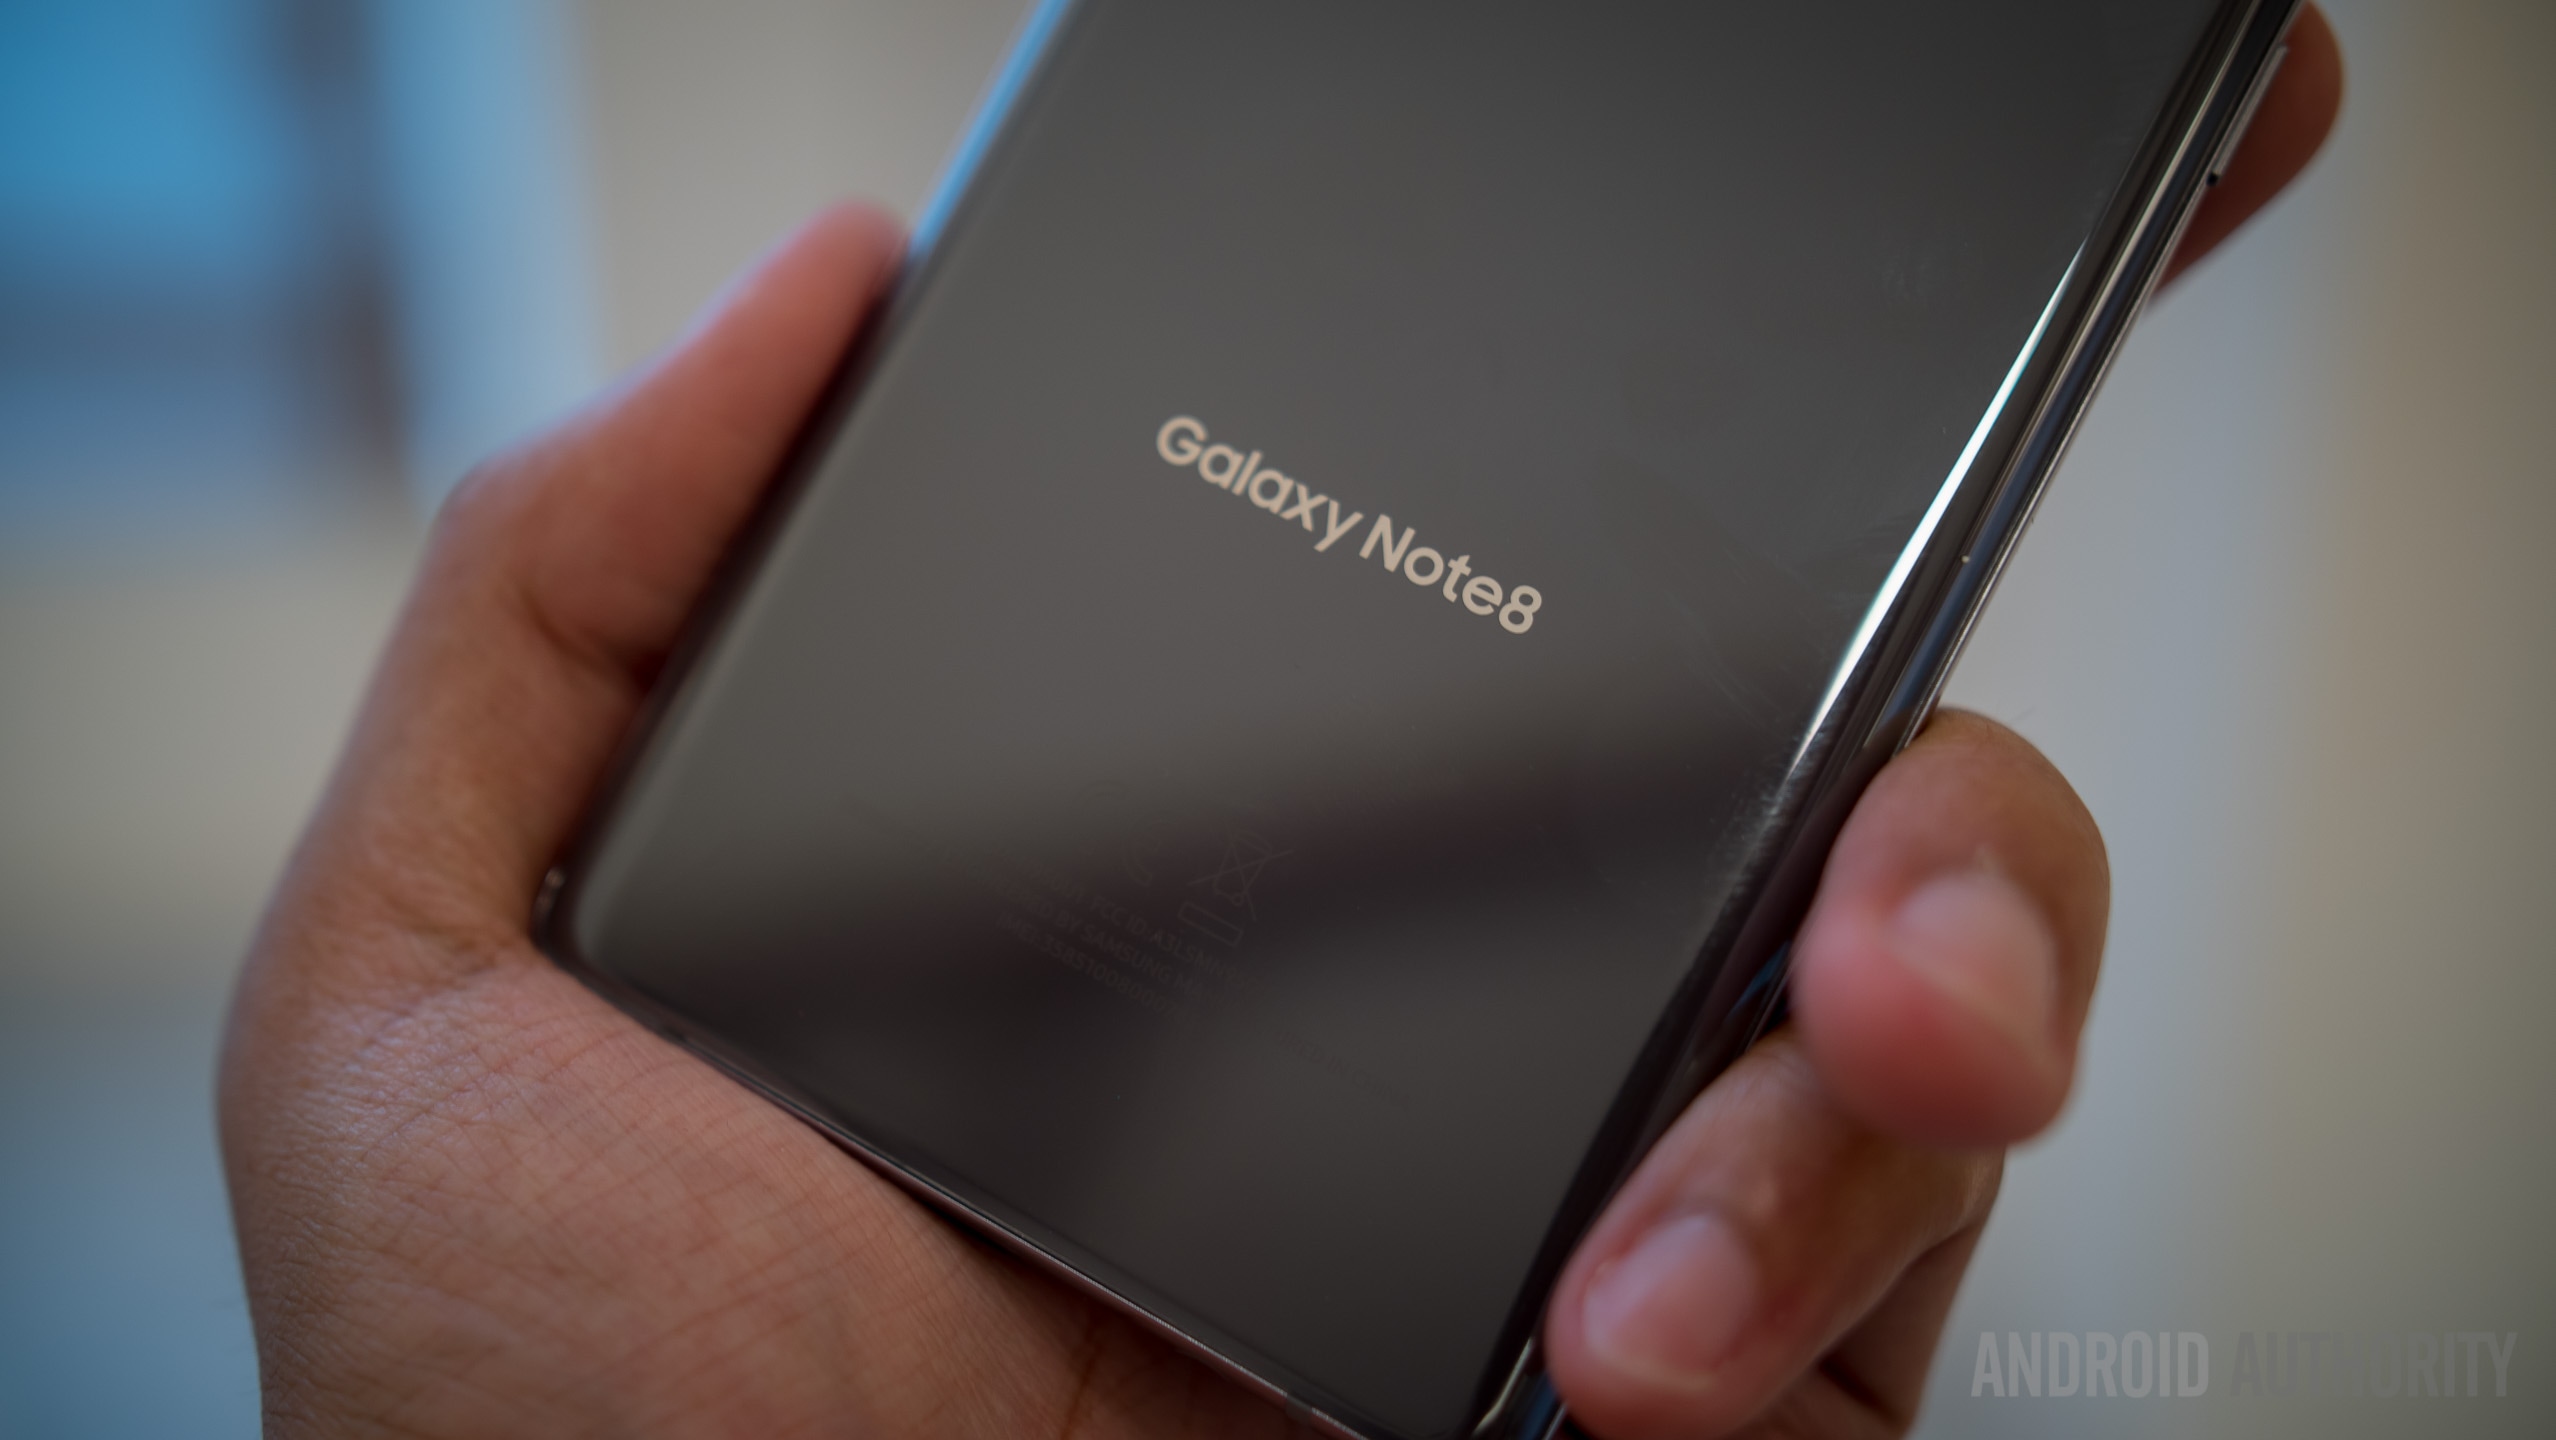 Back of Samsung Galaxy Note8